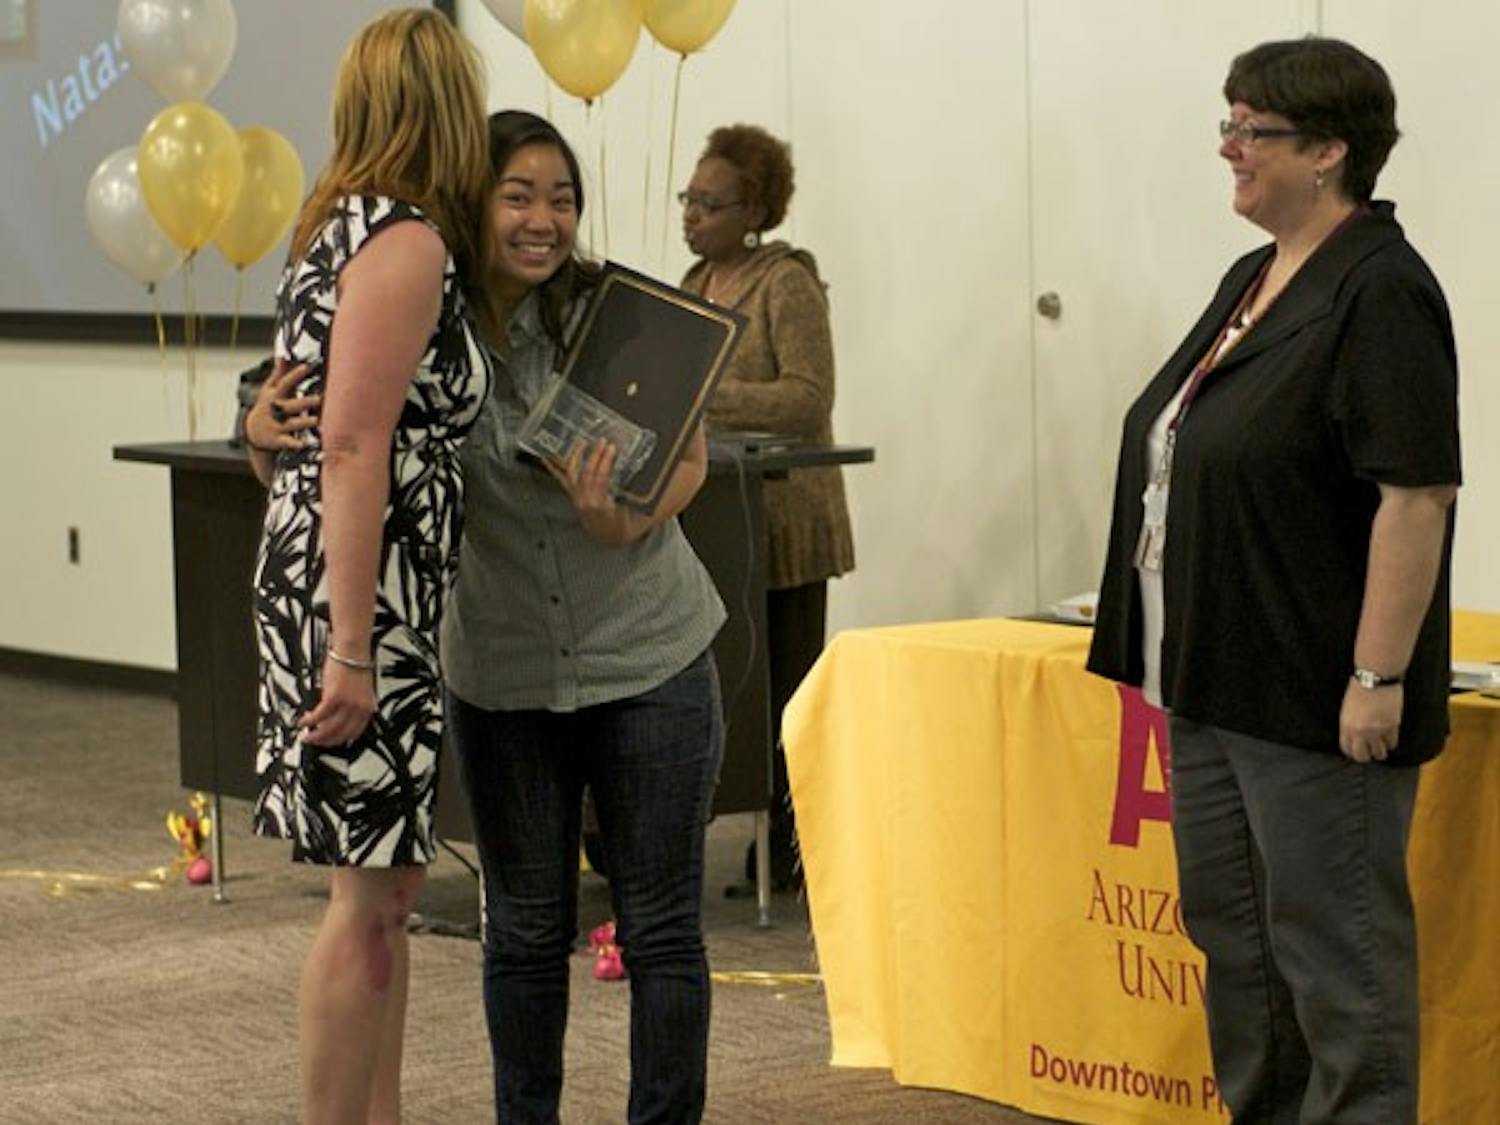 DISTINGUISHED DEVIL: Junior interdisciplinary studies major Natasia Cara Bongcas hugs the woman who nominated her, Lorrie Miller, as she accepts her award for Outstanding Student Employee at the Distinguished Devils Awards Ceremony on Wednesday. (Photo by Molly Smith)